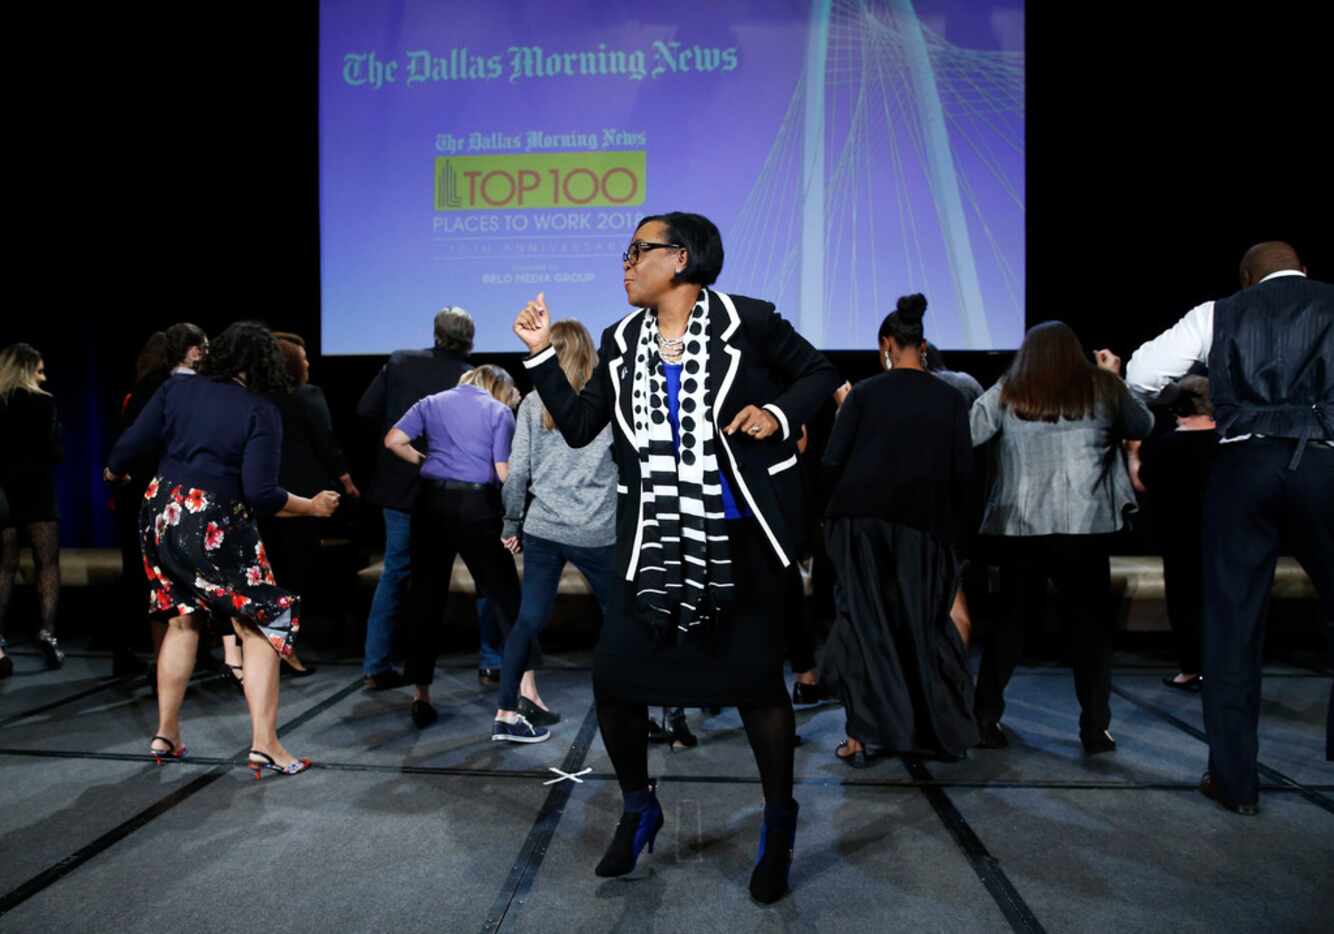 Dallas Mavericks CEO Cynt Marshall danced with people in the audience during her...